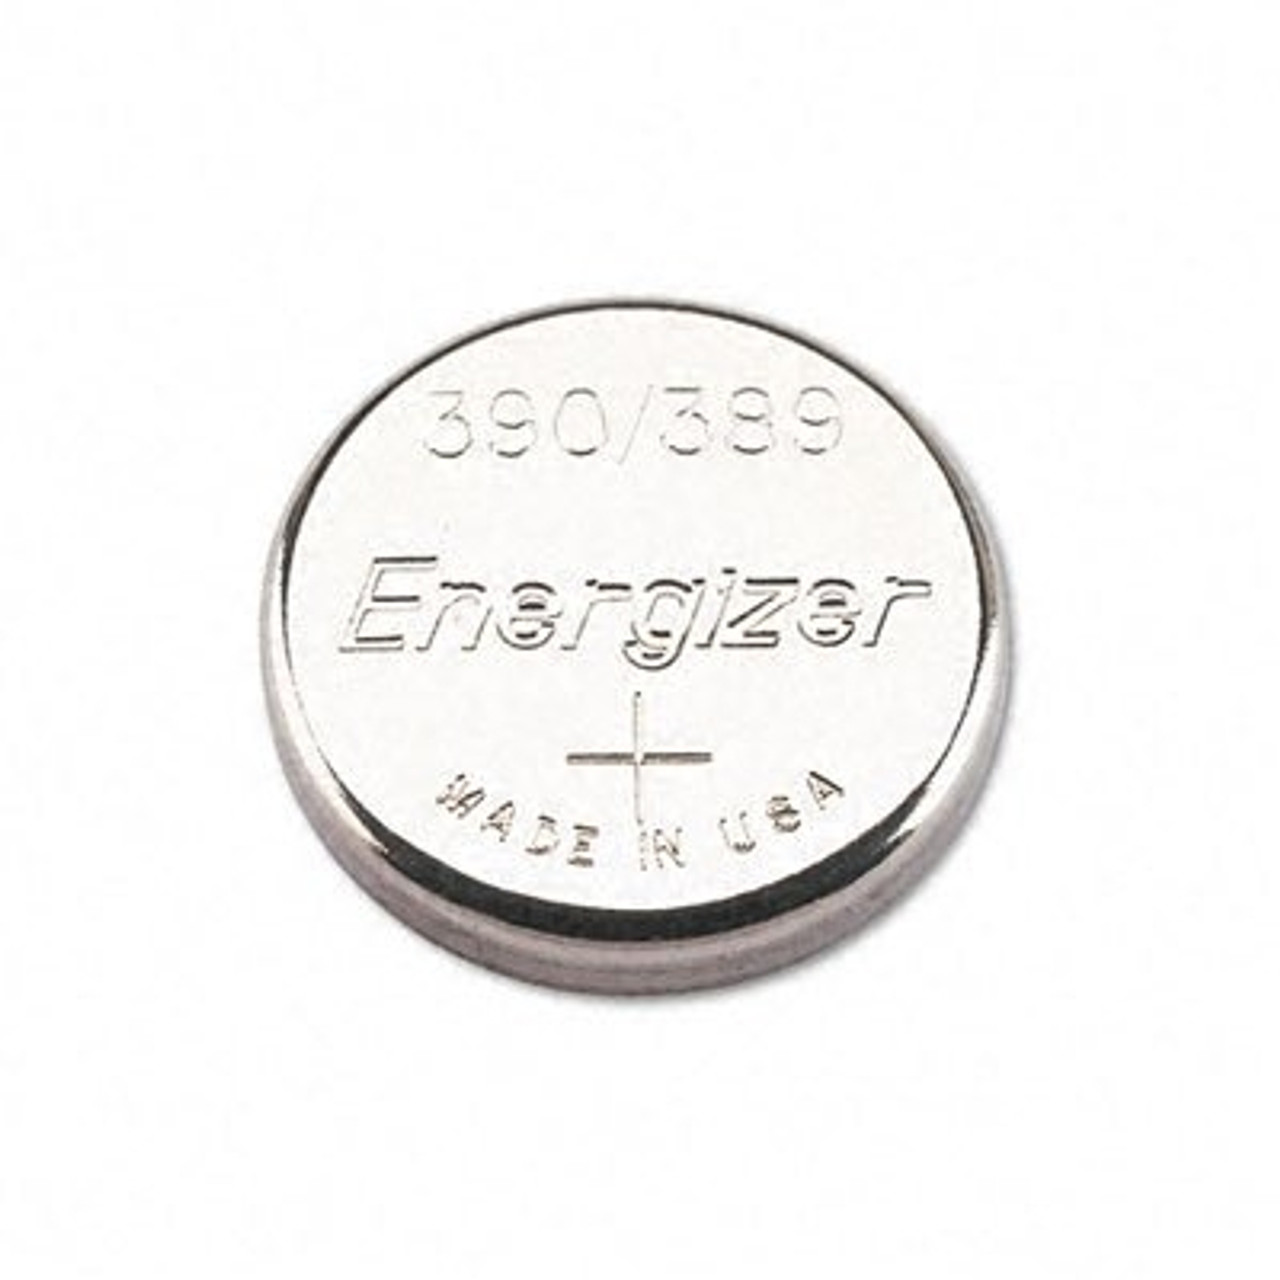 Energizer 389BP Watch Battery - Name Brand Overstock